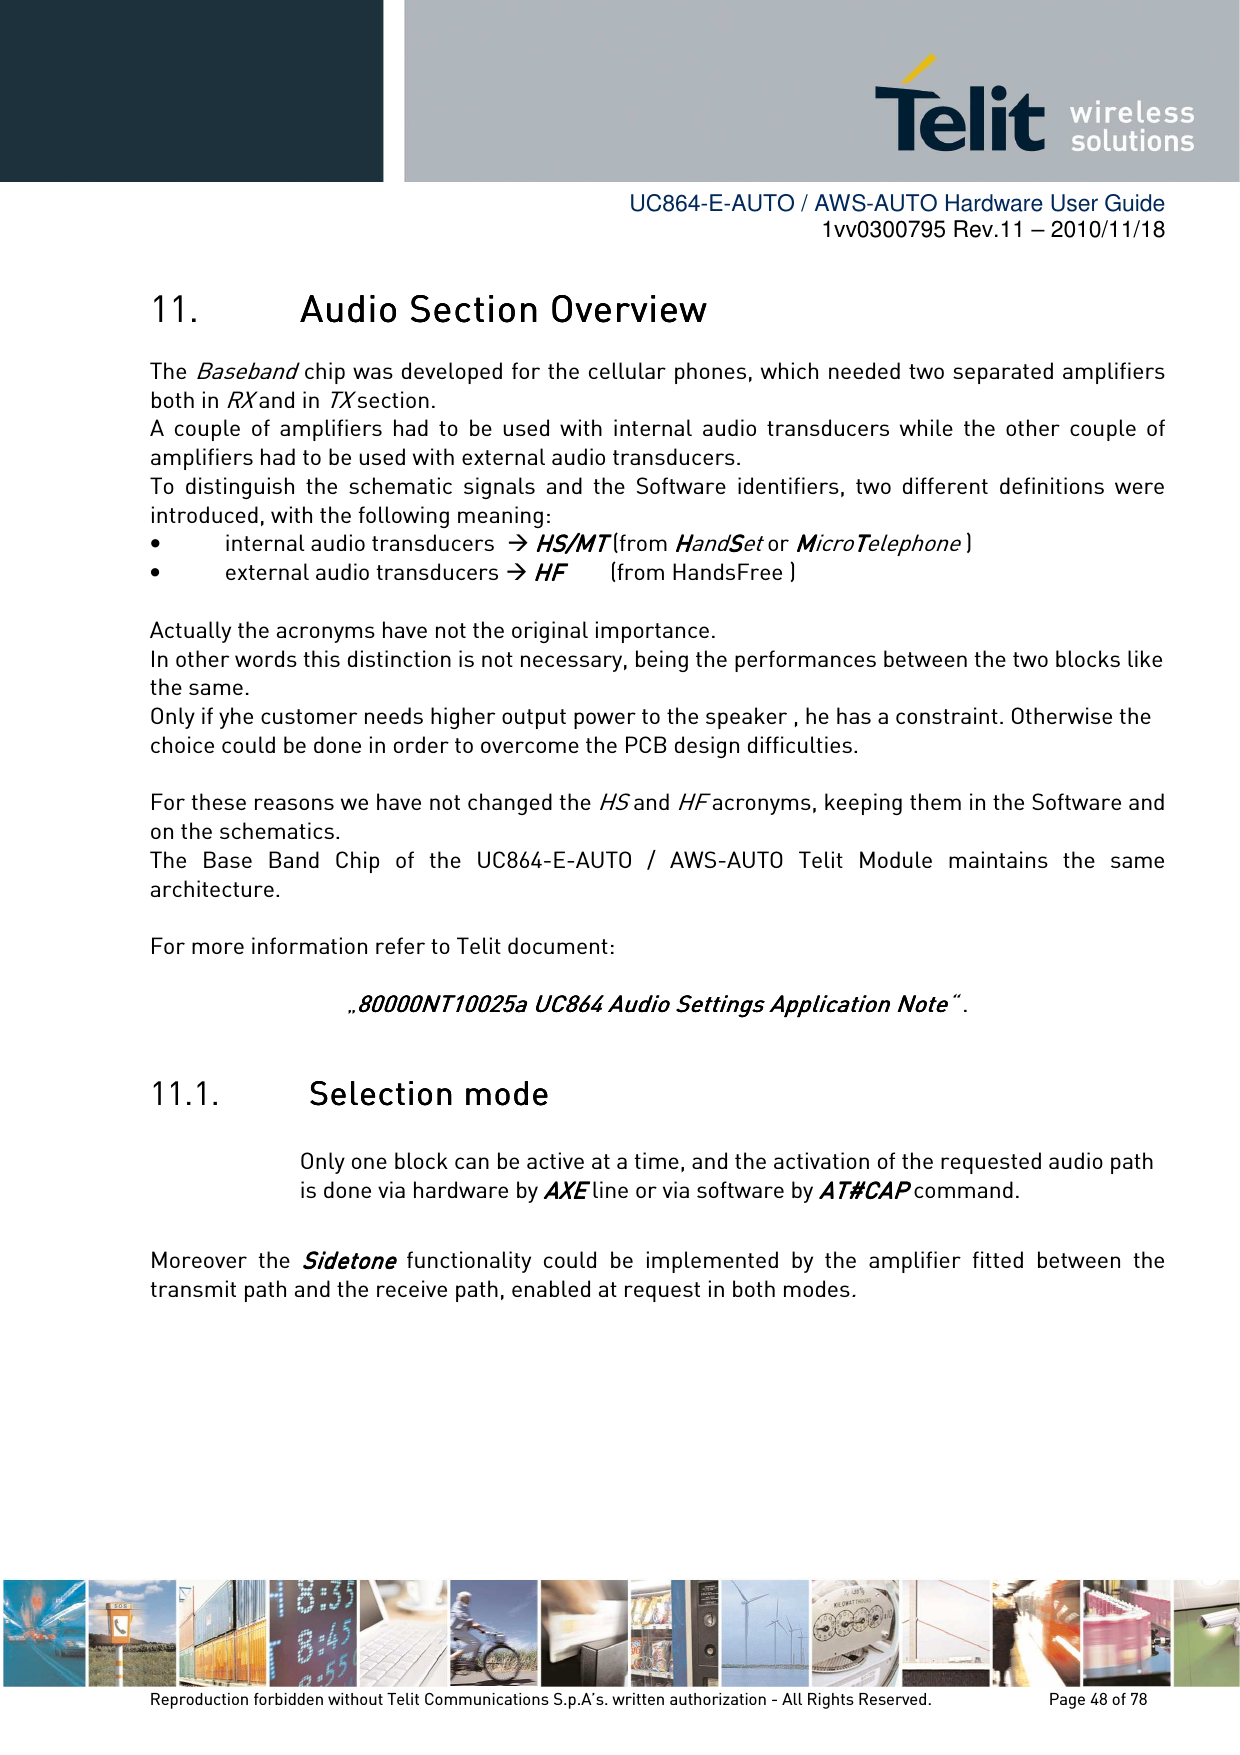        UC864-E-AUTO / AWS-AUTO Hardware User Guide 1vv0300795 Rev.11 – 2010/11/18     Reproduction forbidden without Telit Communications S.p.A’s. written authorization - All Rights Reserved.    Page 48 of 78  11. Audio Section OverviewAudio Section OverviewAudio Section OverviewAudio Section Overview    The Baseband    chip was developed for the cellular phones, which needed two separated amplifiers both in RX and in TX section. A  couple  of  amplifiers  had  to  be  used  with  internal  audio  transducers  while  the  other  couple  of amplifiers had to be used with external audio transducers. To  distinguish  the  schematic  signals  and  the  Software  identifiers,  two  different  definitions  were introduced, with the following meaning: • internal audio transducers   HS/MTHS/MTHS/MTHS/MT (from HHHHandSSSSet or MMMMicroTTTTelephone ) • external audio transducers  HF HF HF HF        (from HandsFree )     Actually the acronyms have not the original importance.  In other words this distinction is not necessary, being the performances between the two blocks like the same. Only if yhe customer needs higher output power to the speaker , he has a constraint. Otherwise the choice could be done in order to overcome the PCB design difficulties.   For these reasons we have not changed the HS and HF acronyms, keeping them in the Software and on the schematics.  The  Base  Band  Chip  of  the  UC864-E-AUTO  /  AWS-AUTO  Telit  Module  maintains  the  same architecture.  For more information refer to Telit document:   „80000NT10025a UC864 Audio Settings Application Note80000NT10025a UC864 Audio Settings Application Note80000NT10025a UC864 Audio Settings Application Note80000NT10025a UC864 Audio Settings Application Note“ .  11.1.     SelectiSelectiSelectiSelection modeon modeon modeon mode    Only one block can be active at a time, and the activation of the requested audio path is done via hardware by AXEAXEAXEAXE line or via software by AT#CAPAT#CAPAT#CAPAT#CAP command.   Moreover  the SidetoneSidetoneSidetoneSidetone  functionality  could  be  implemented  by  the  amplifier  fitted  between  the transmit path and the receive path, enabled at request in both modes.       